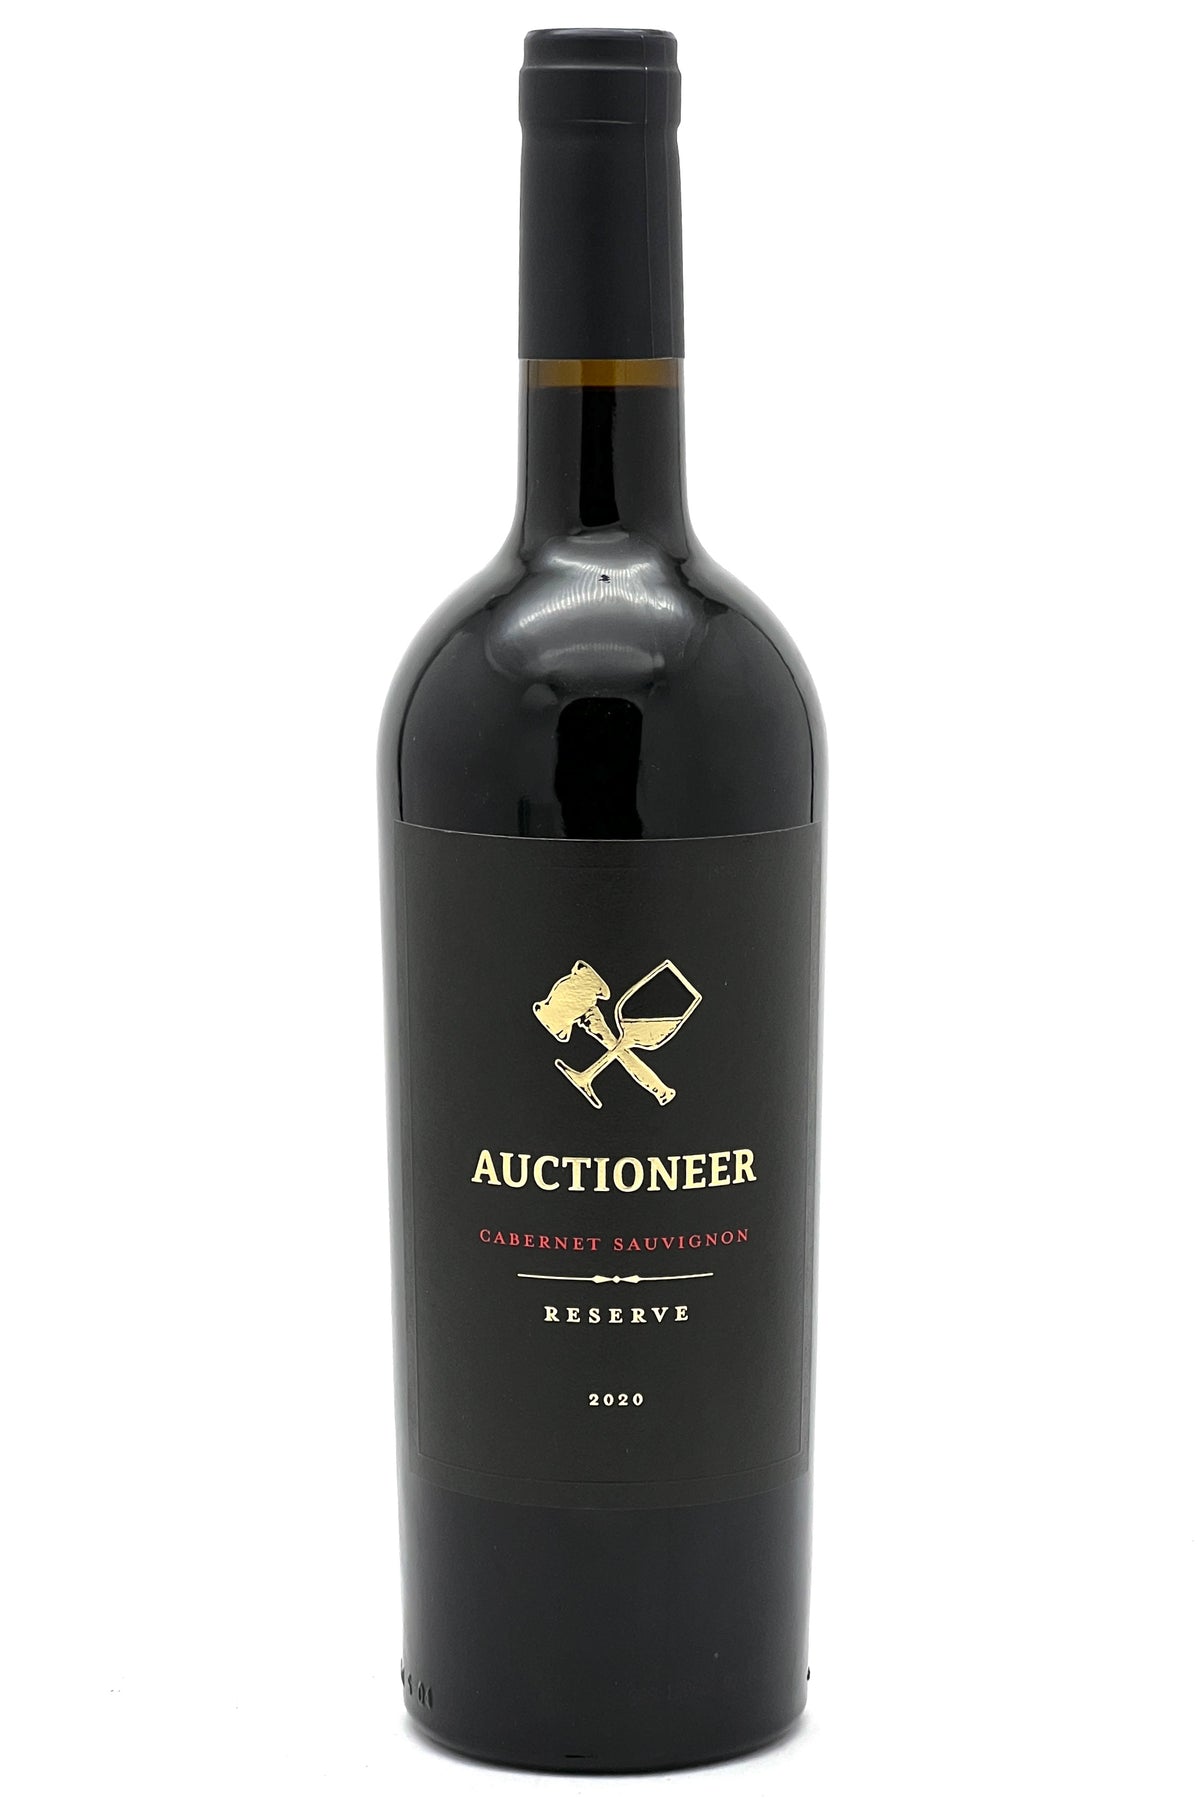 Auctioneer 2020 Cabernet Sauvignon Reserve Howell Mountain